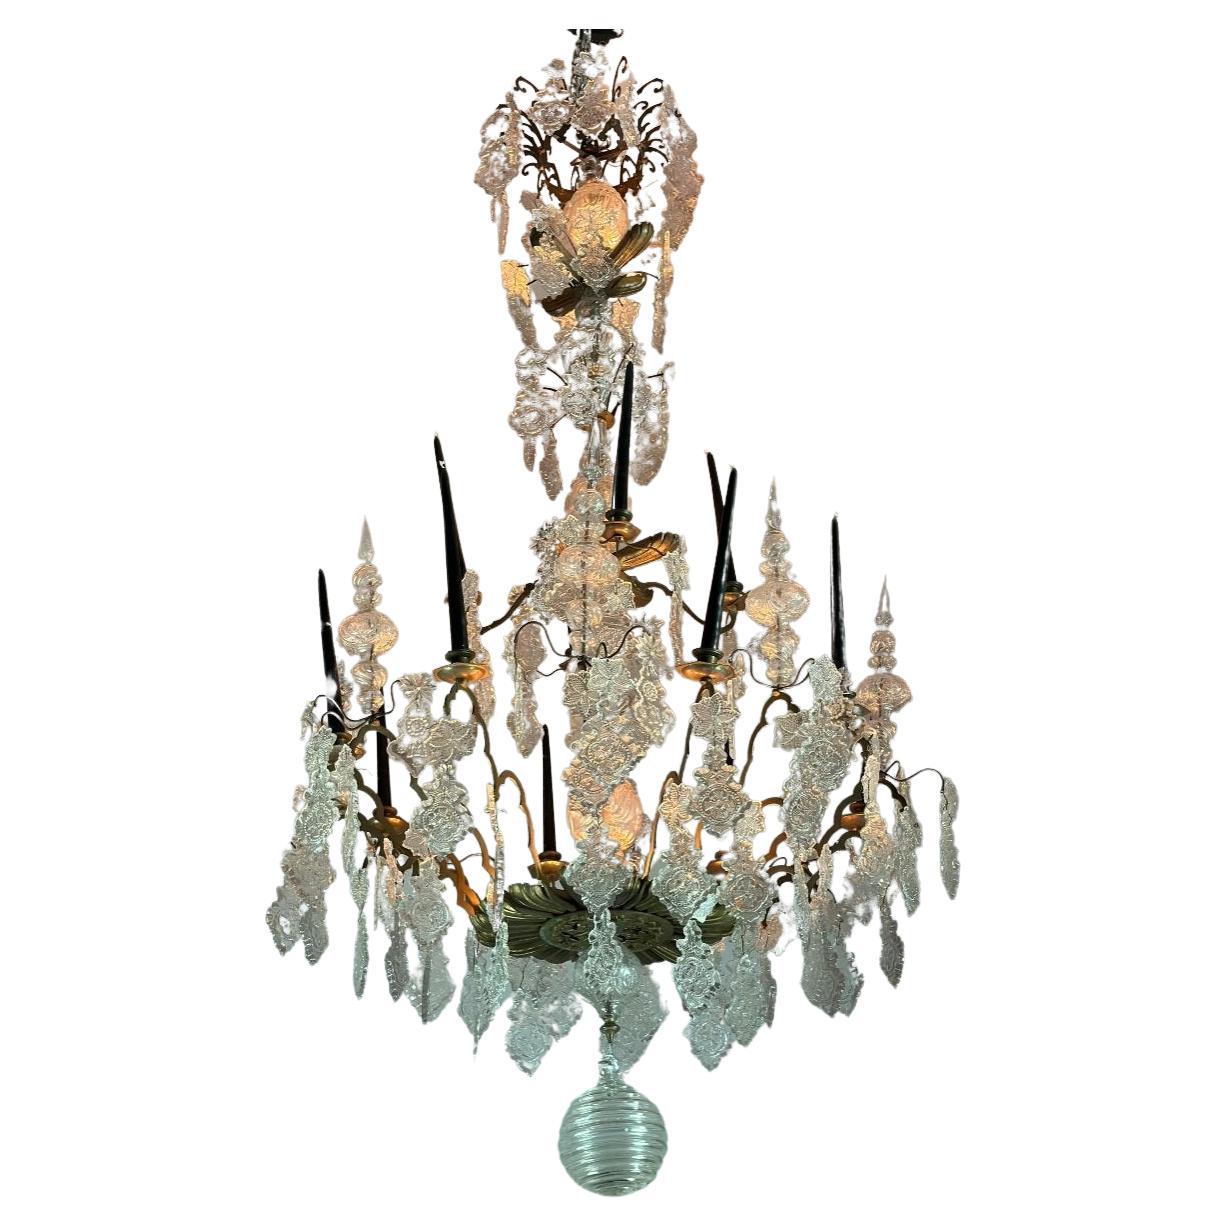 Large Bronze Chandelier Trimmed With Molded Glass Tassels Circa 1800